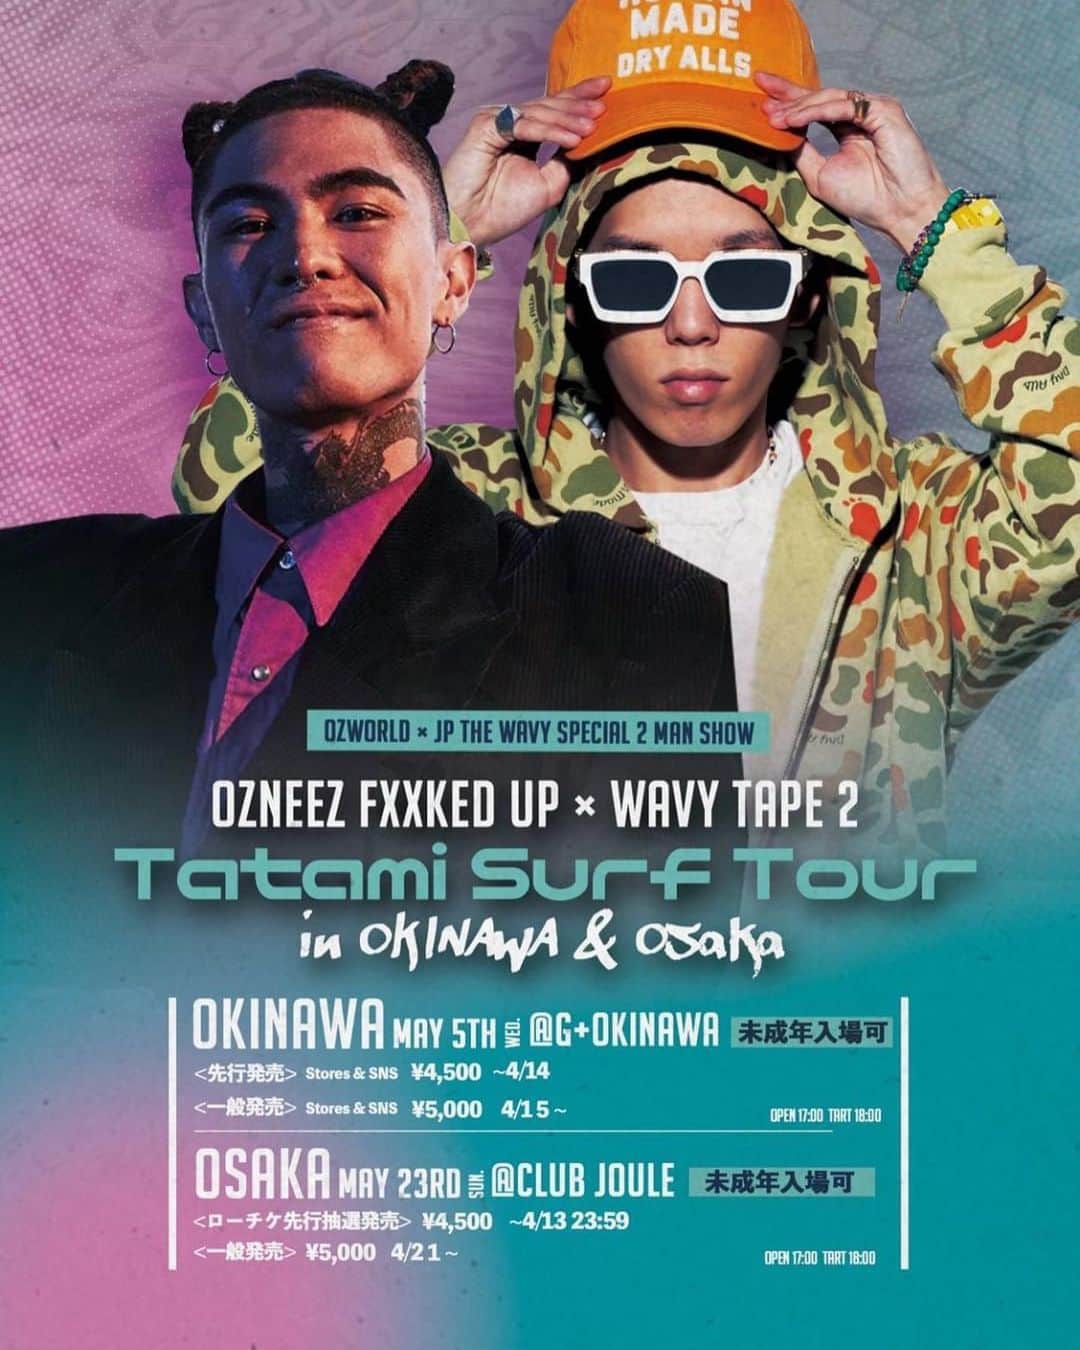 JP THE WAVYさんのインスタグラム写真 - (JP THE WAVYInstagram)「🌊発表🌊  - OZworld × JP THE WAVY SPECIAL 2MAN SHOW -  “OZNEEZ FXXKED UP x WAVY TAPE 2” TATAMI SURF TOUR in OKINAWA & OSAKA  < OKINAWA >　 2021.05.05 (WED) at G+ OKINAWA OPEN 17:00 START 18:00  TICKET  ＊SNS @makes_oki & Stores only https://trend098.shop/items/6067d3c72305576ed56f0b7f 先行発売 (〜4/14) ¥4.500  一般発売 (4/15〜）¥5,000  < OSAKA > 2021.05.23 (SUN) at CLUB JOULE OPEN 17:00 START 18:00  TICKET ローチケ先行抽選発売 (〜4/13 23:59) ¥4.500  https://l-tike.com/st1/ozworld-jpthewavy0523/sitetop 一般発売 (4/21〜）¥5,000  *未成年入場可 / ドリンク代別  ブチ上げるぜ🌊🐉」4月8日 19時30分 - sorry_wavy